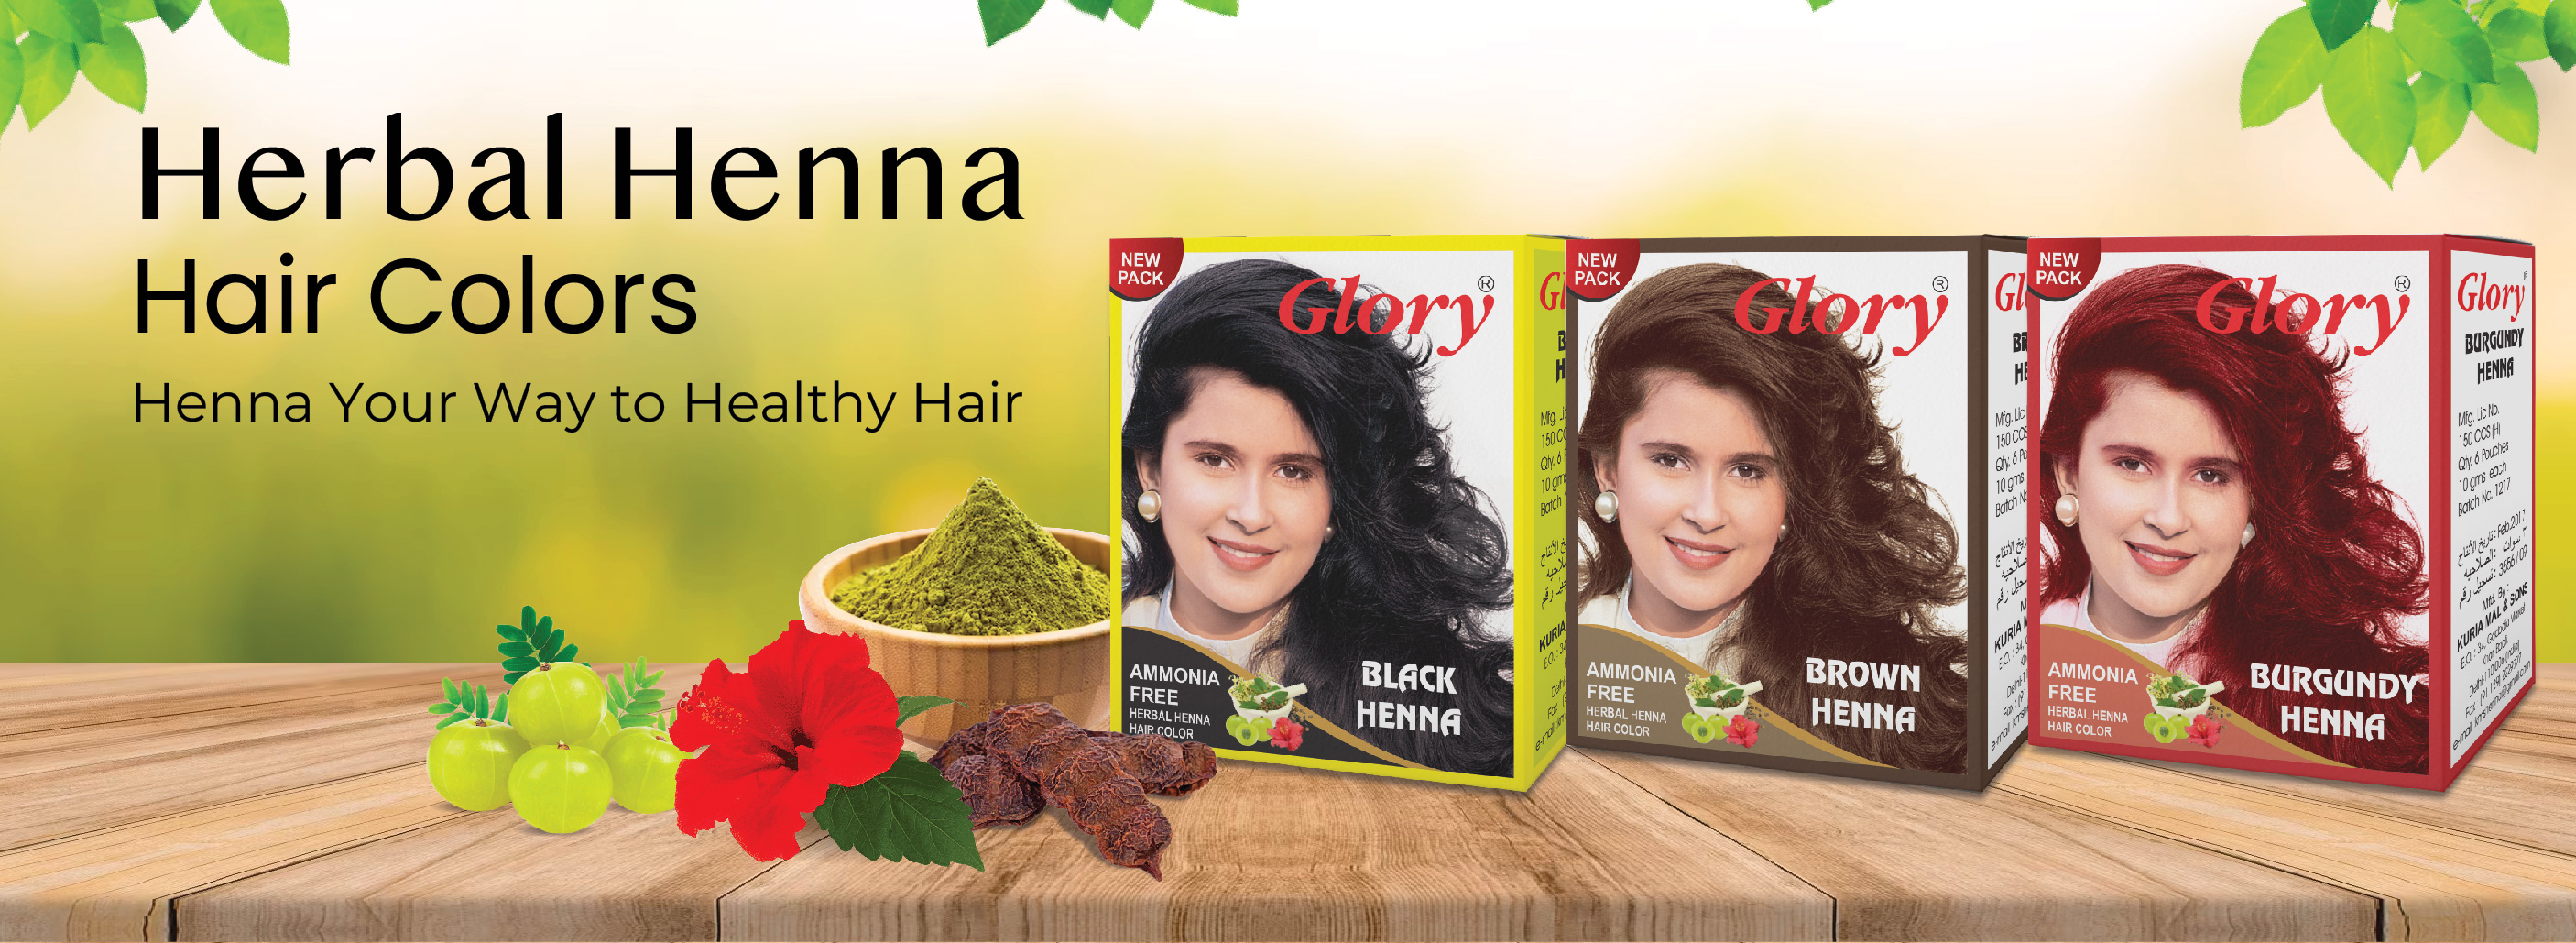 Henna Hair Color Manufacturer | Henna Hair Color Manufacturer in Malaysia